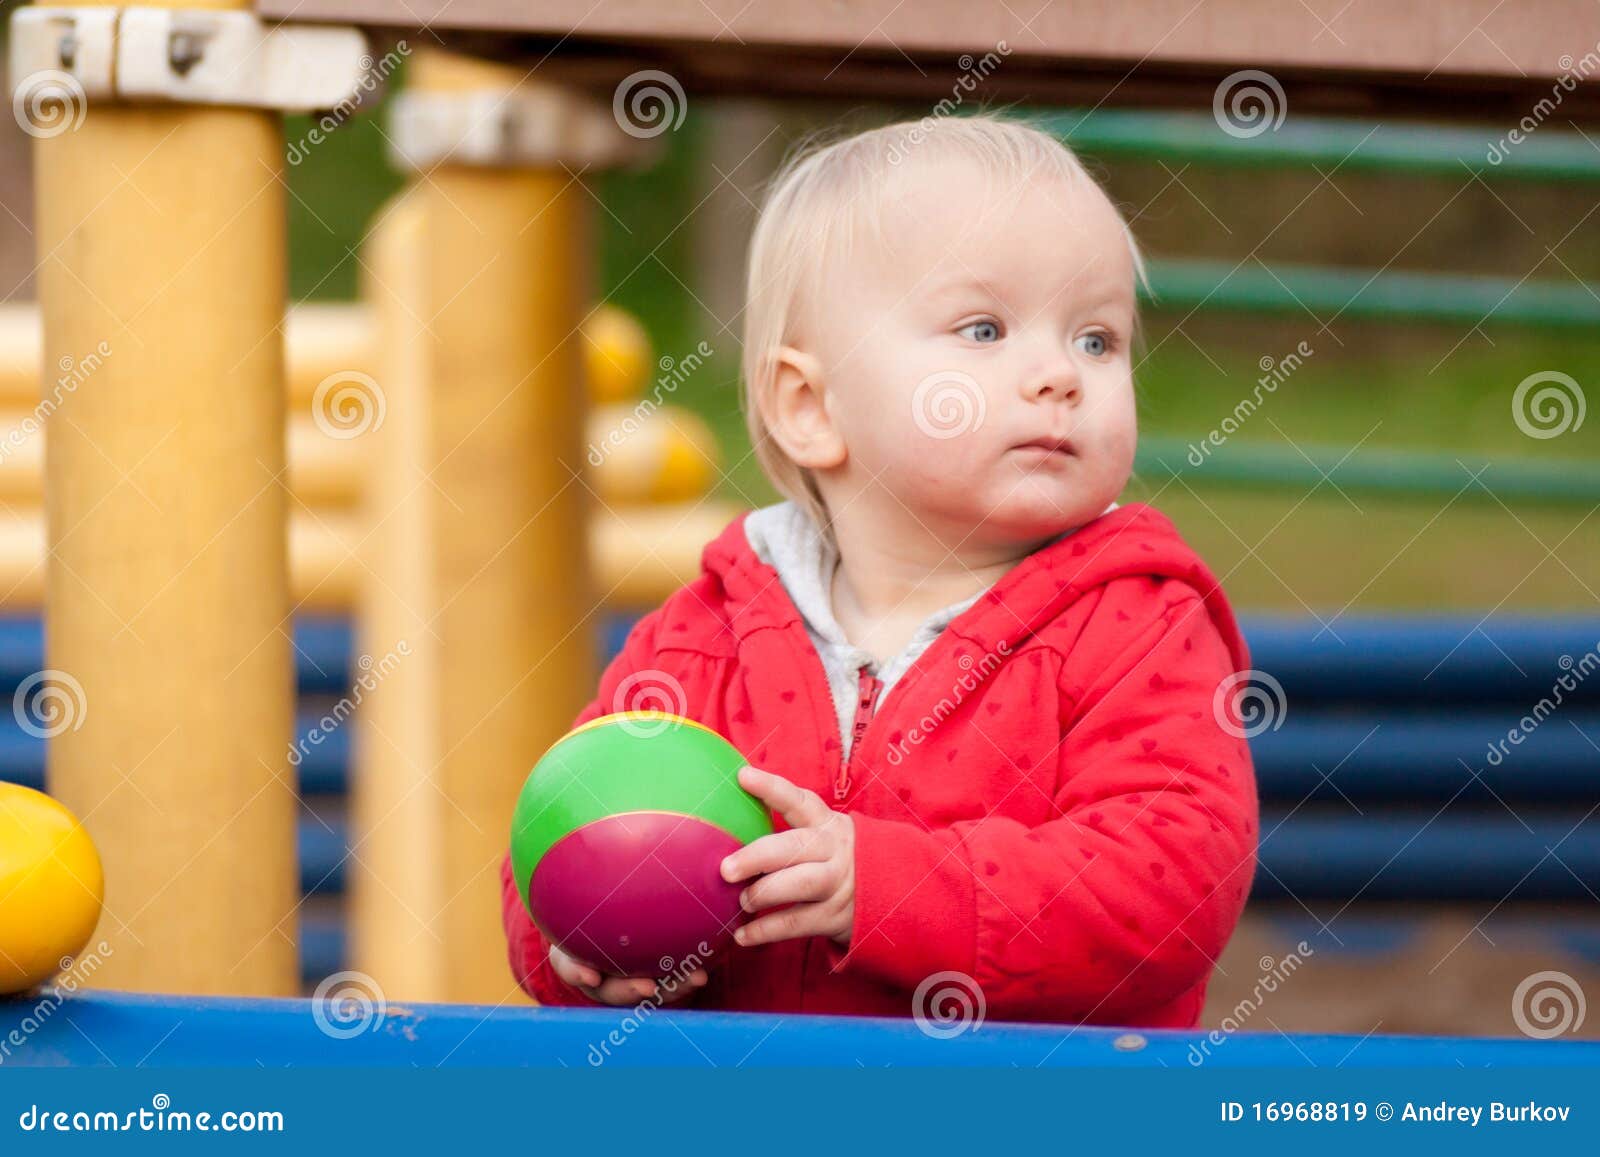 Girl play with rubber ball stock image. Image of daughter - 16968819